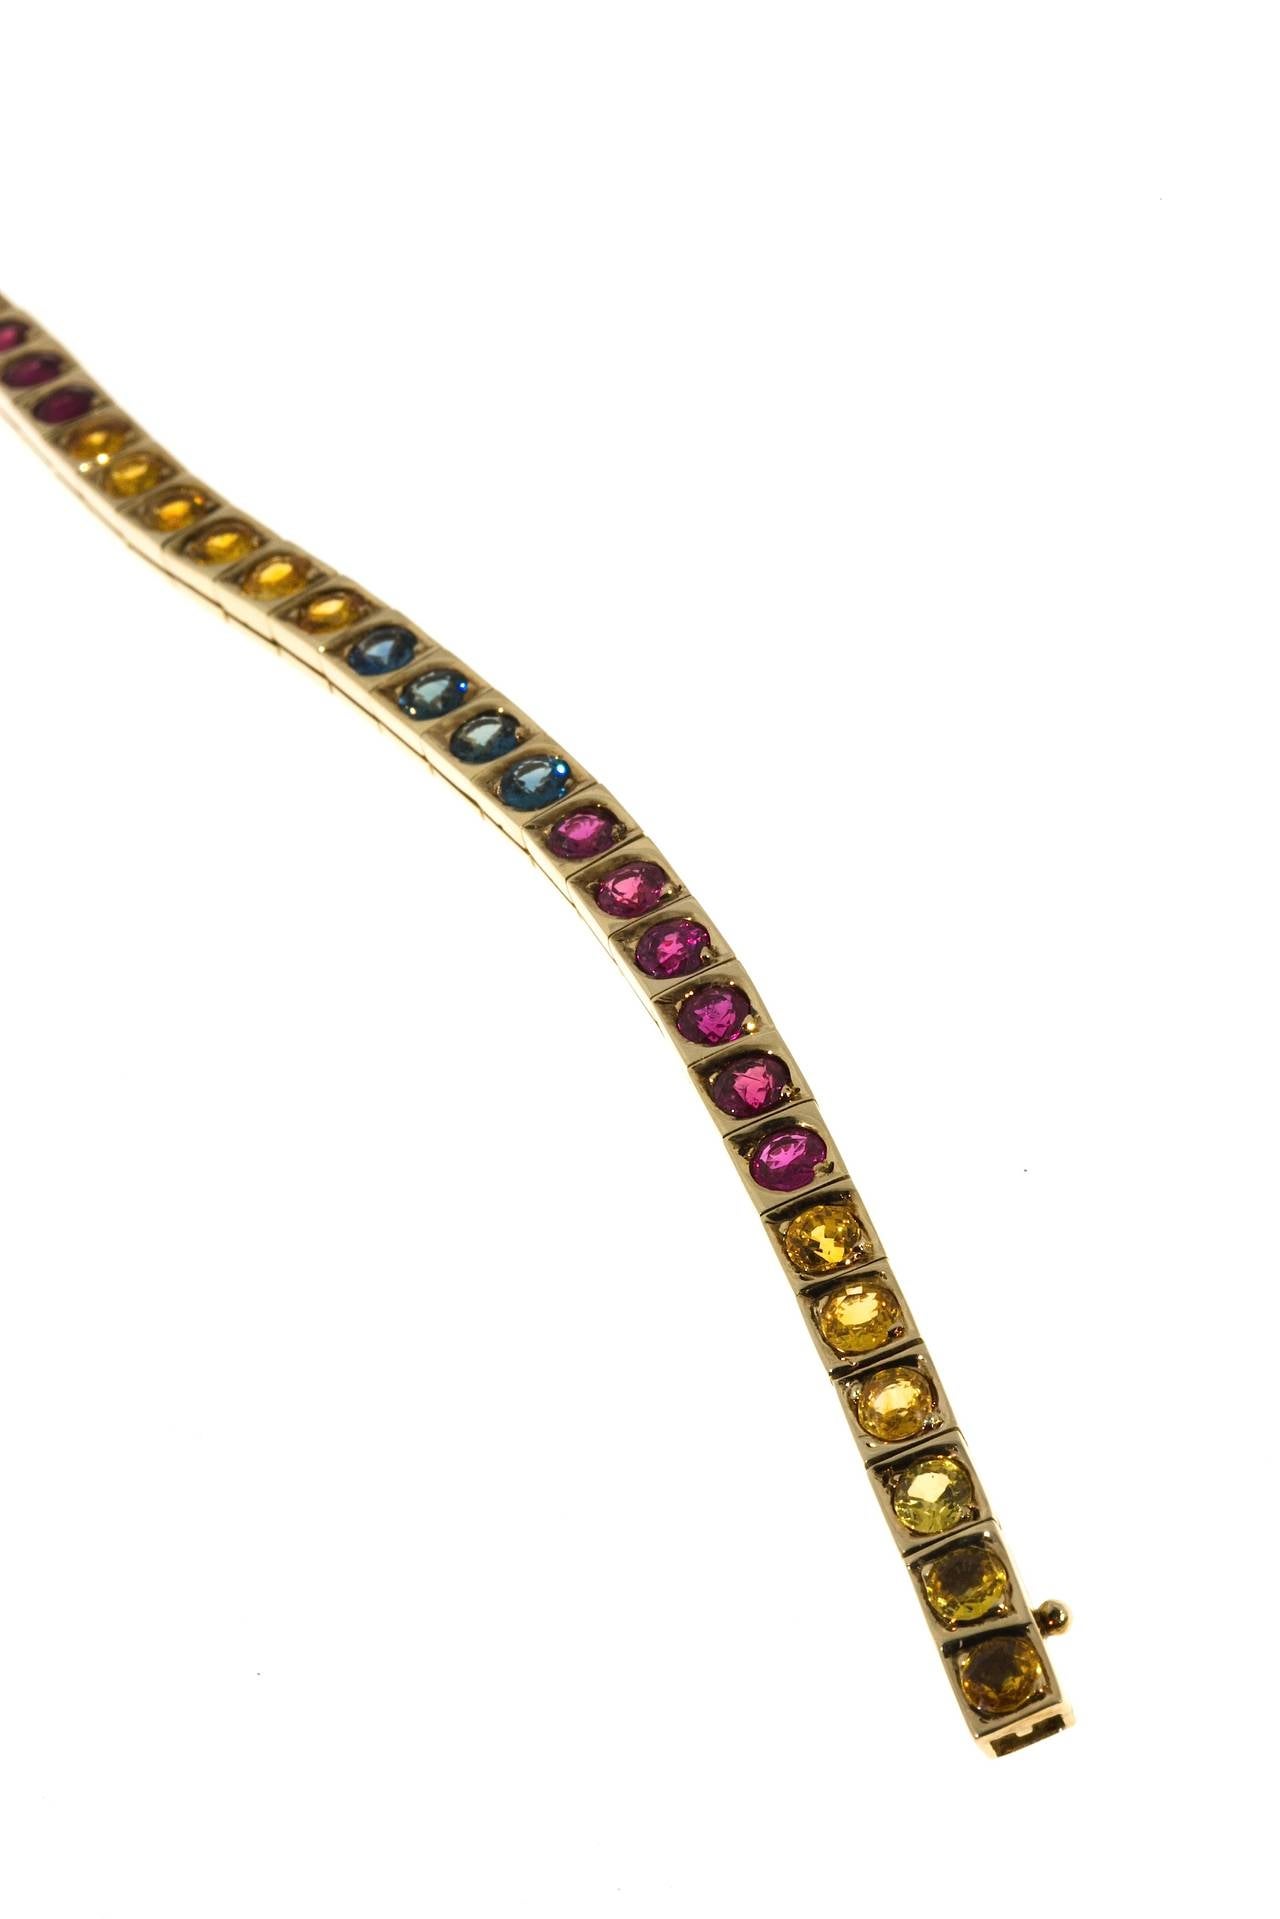 Hinged square box link bracelet with super bright well cut well blended all color Rubies and blue and yellow Sapphires. All GIA certified. The blue and yellow Sapphires are simple heat only. The Rubies are simple heat with minor residue. Hidden